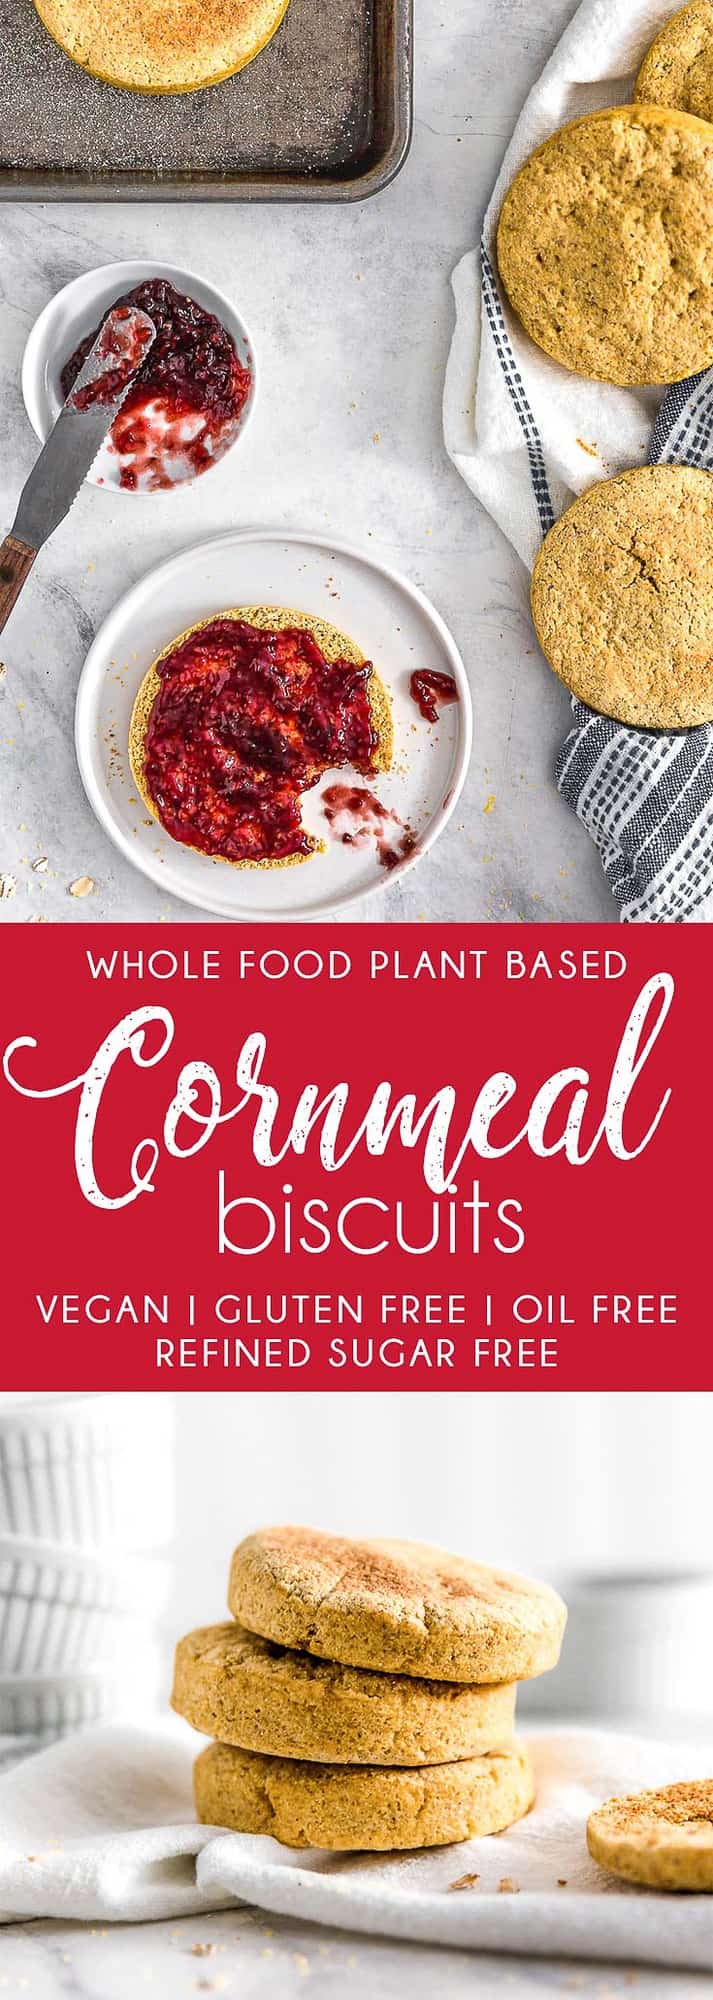 Cornmeal Biscuit, plant based, vegan, vegetarian, whole food plant based, gluten free, recipe, wfpb, healthy, healthy vegan, oil free, no refined sugar, no oil, refined sugar free, dairy free, cornmeal, biscuit, bread, english muffin, easy recipe, fast recipe, sides, breakfast